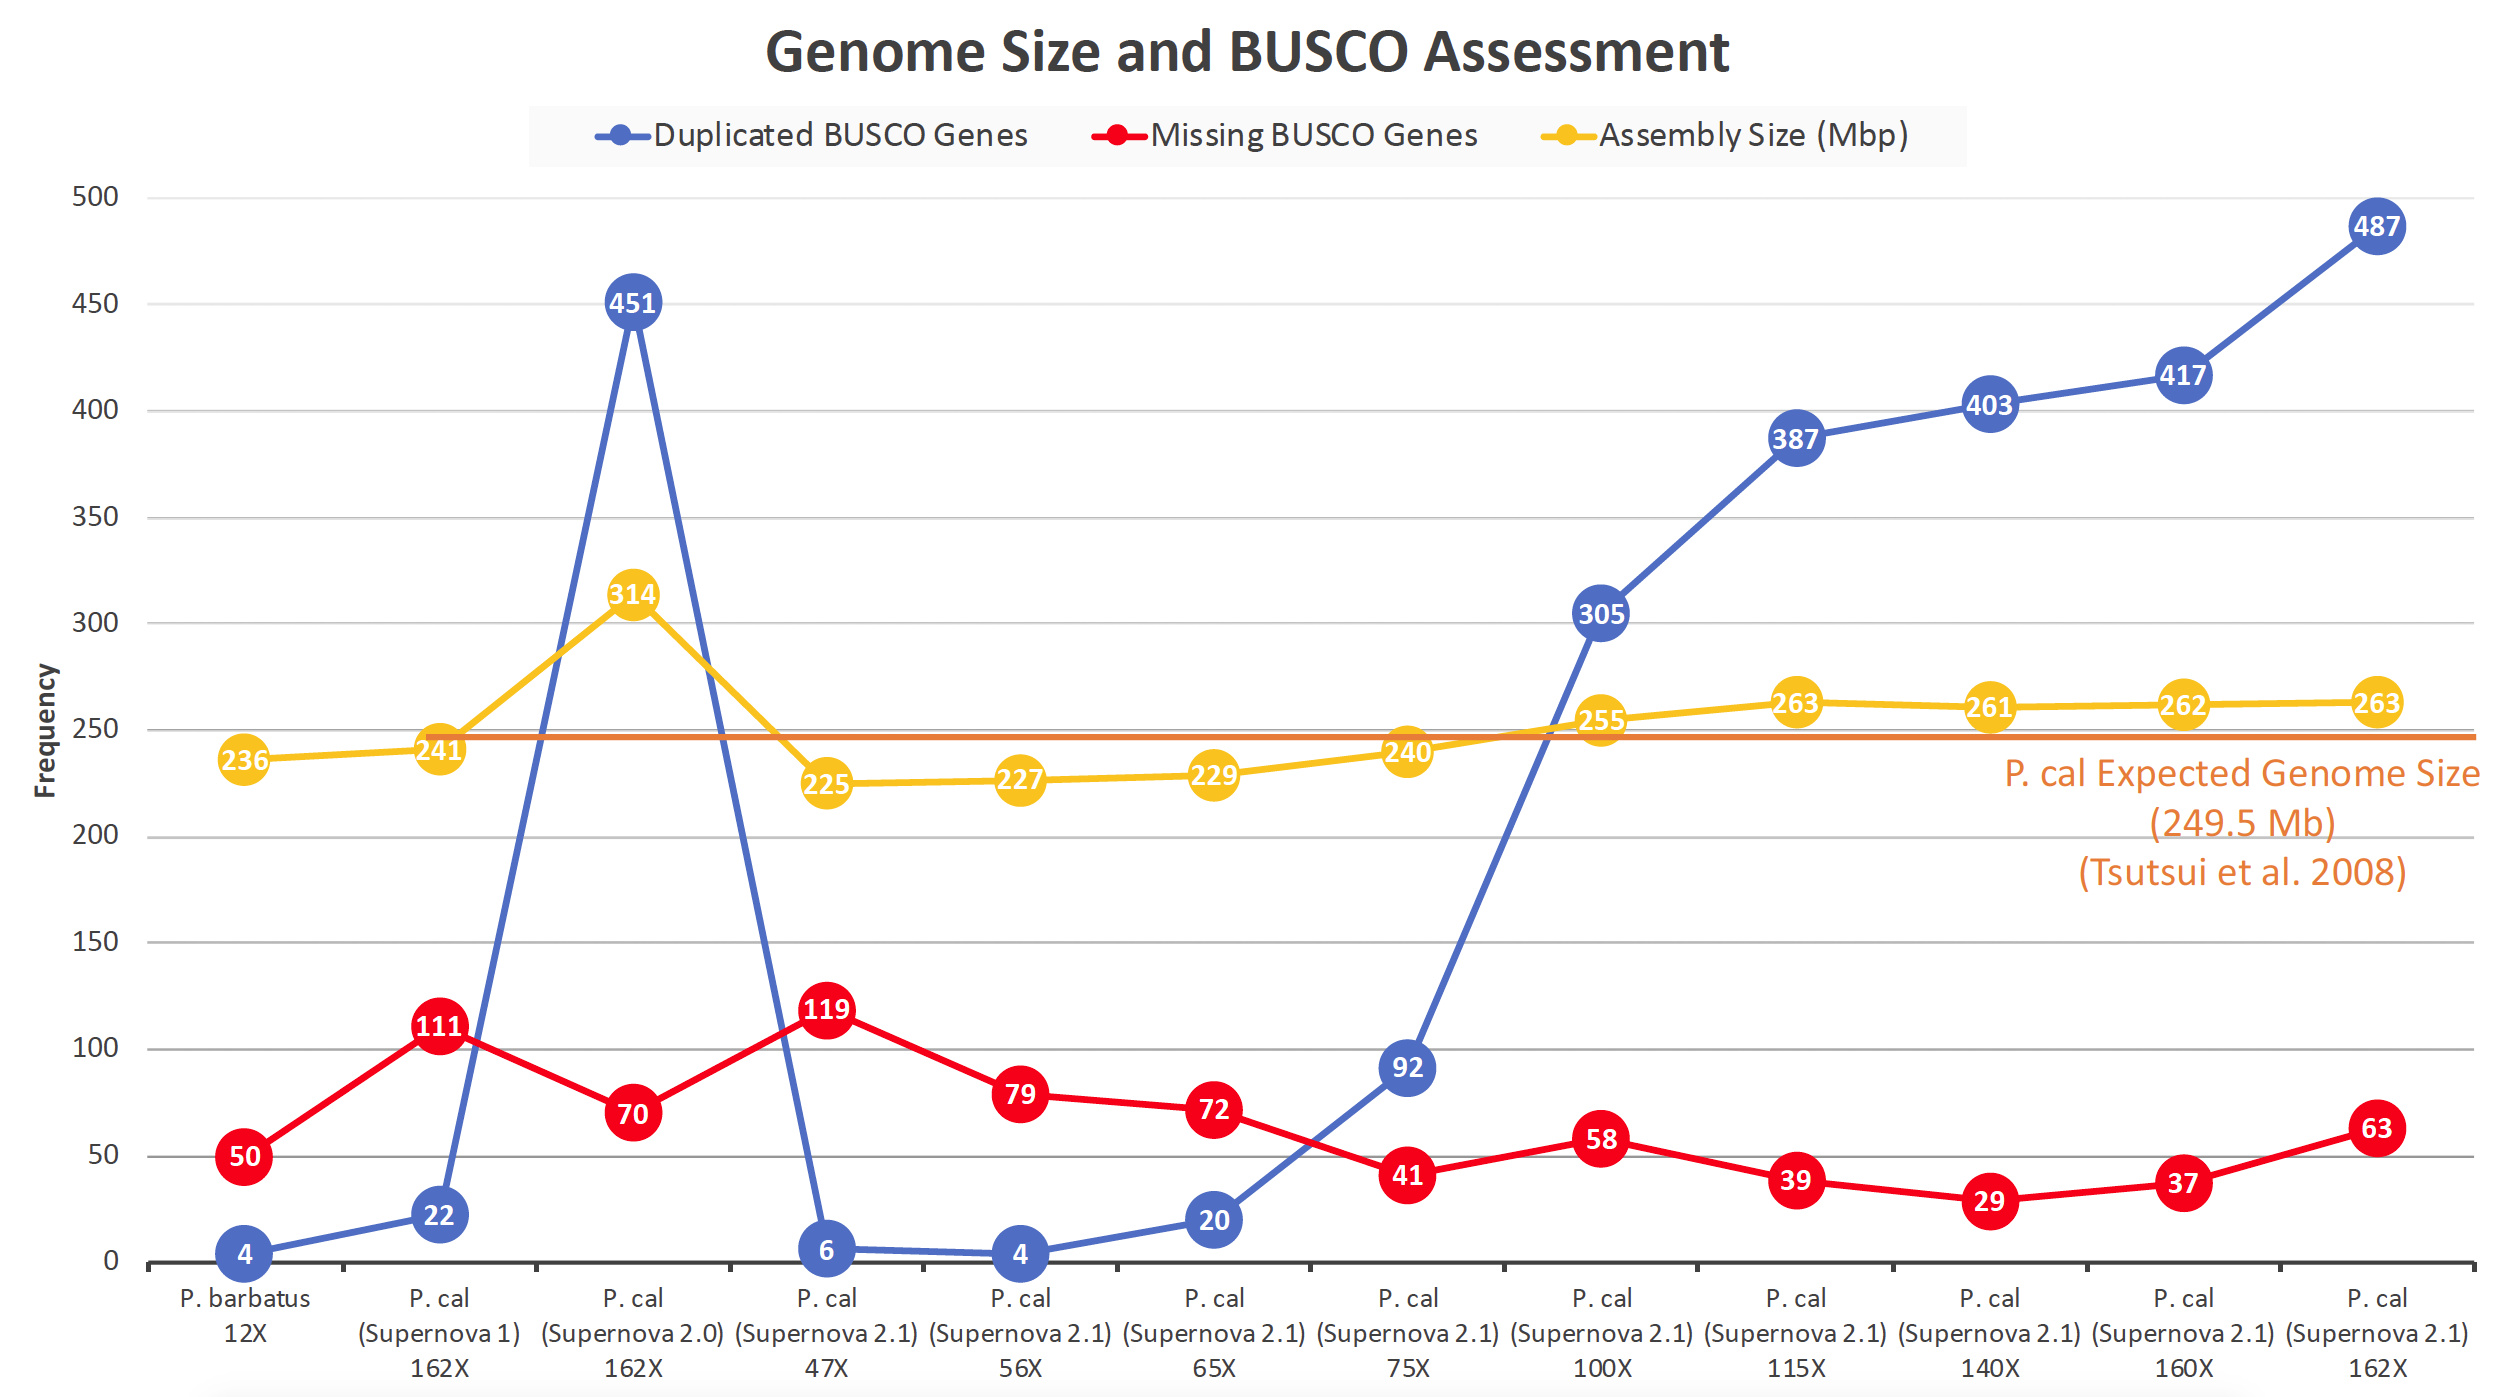 Genome size and quality estimation